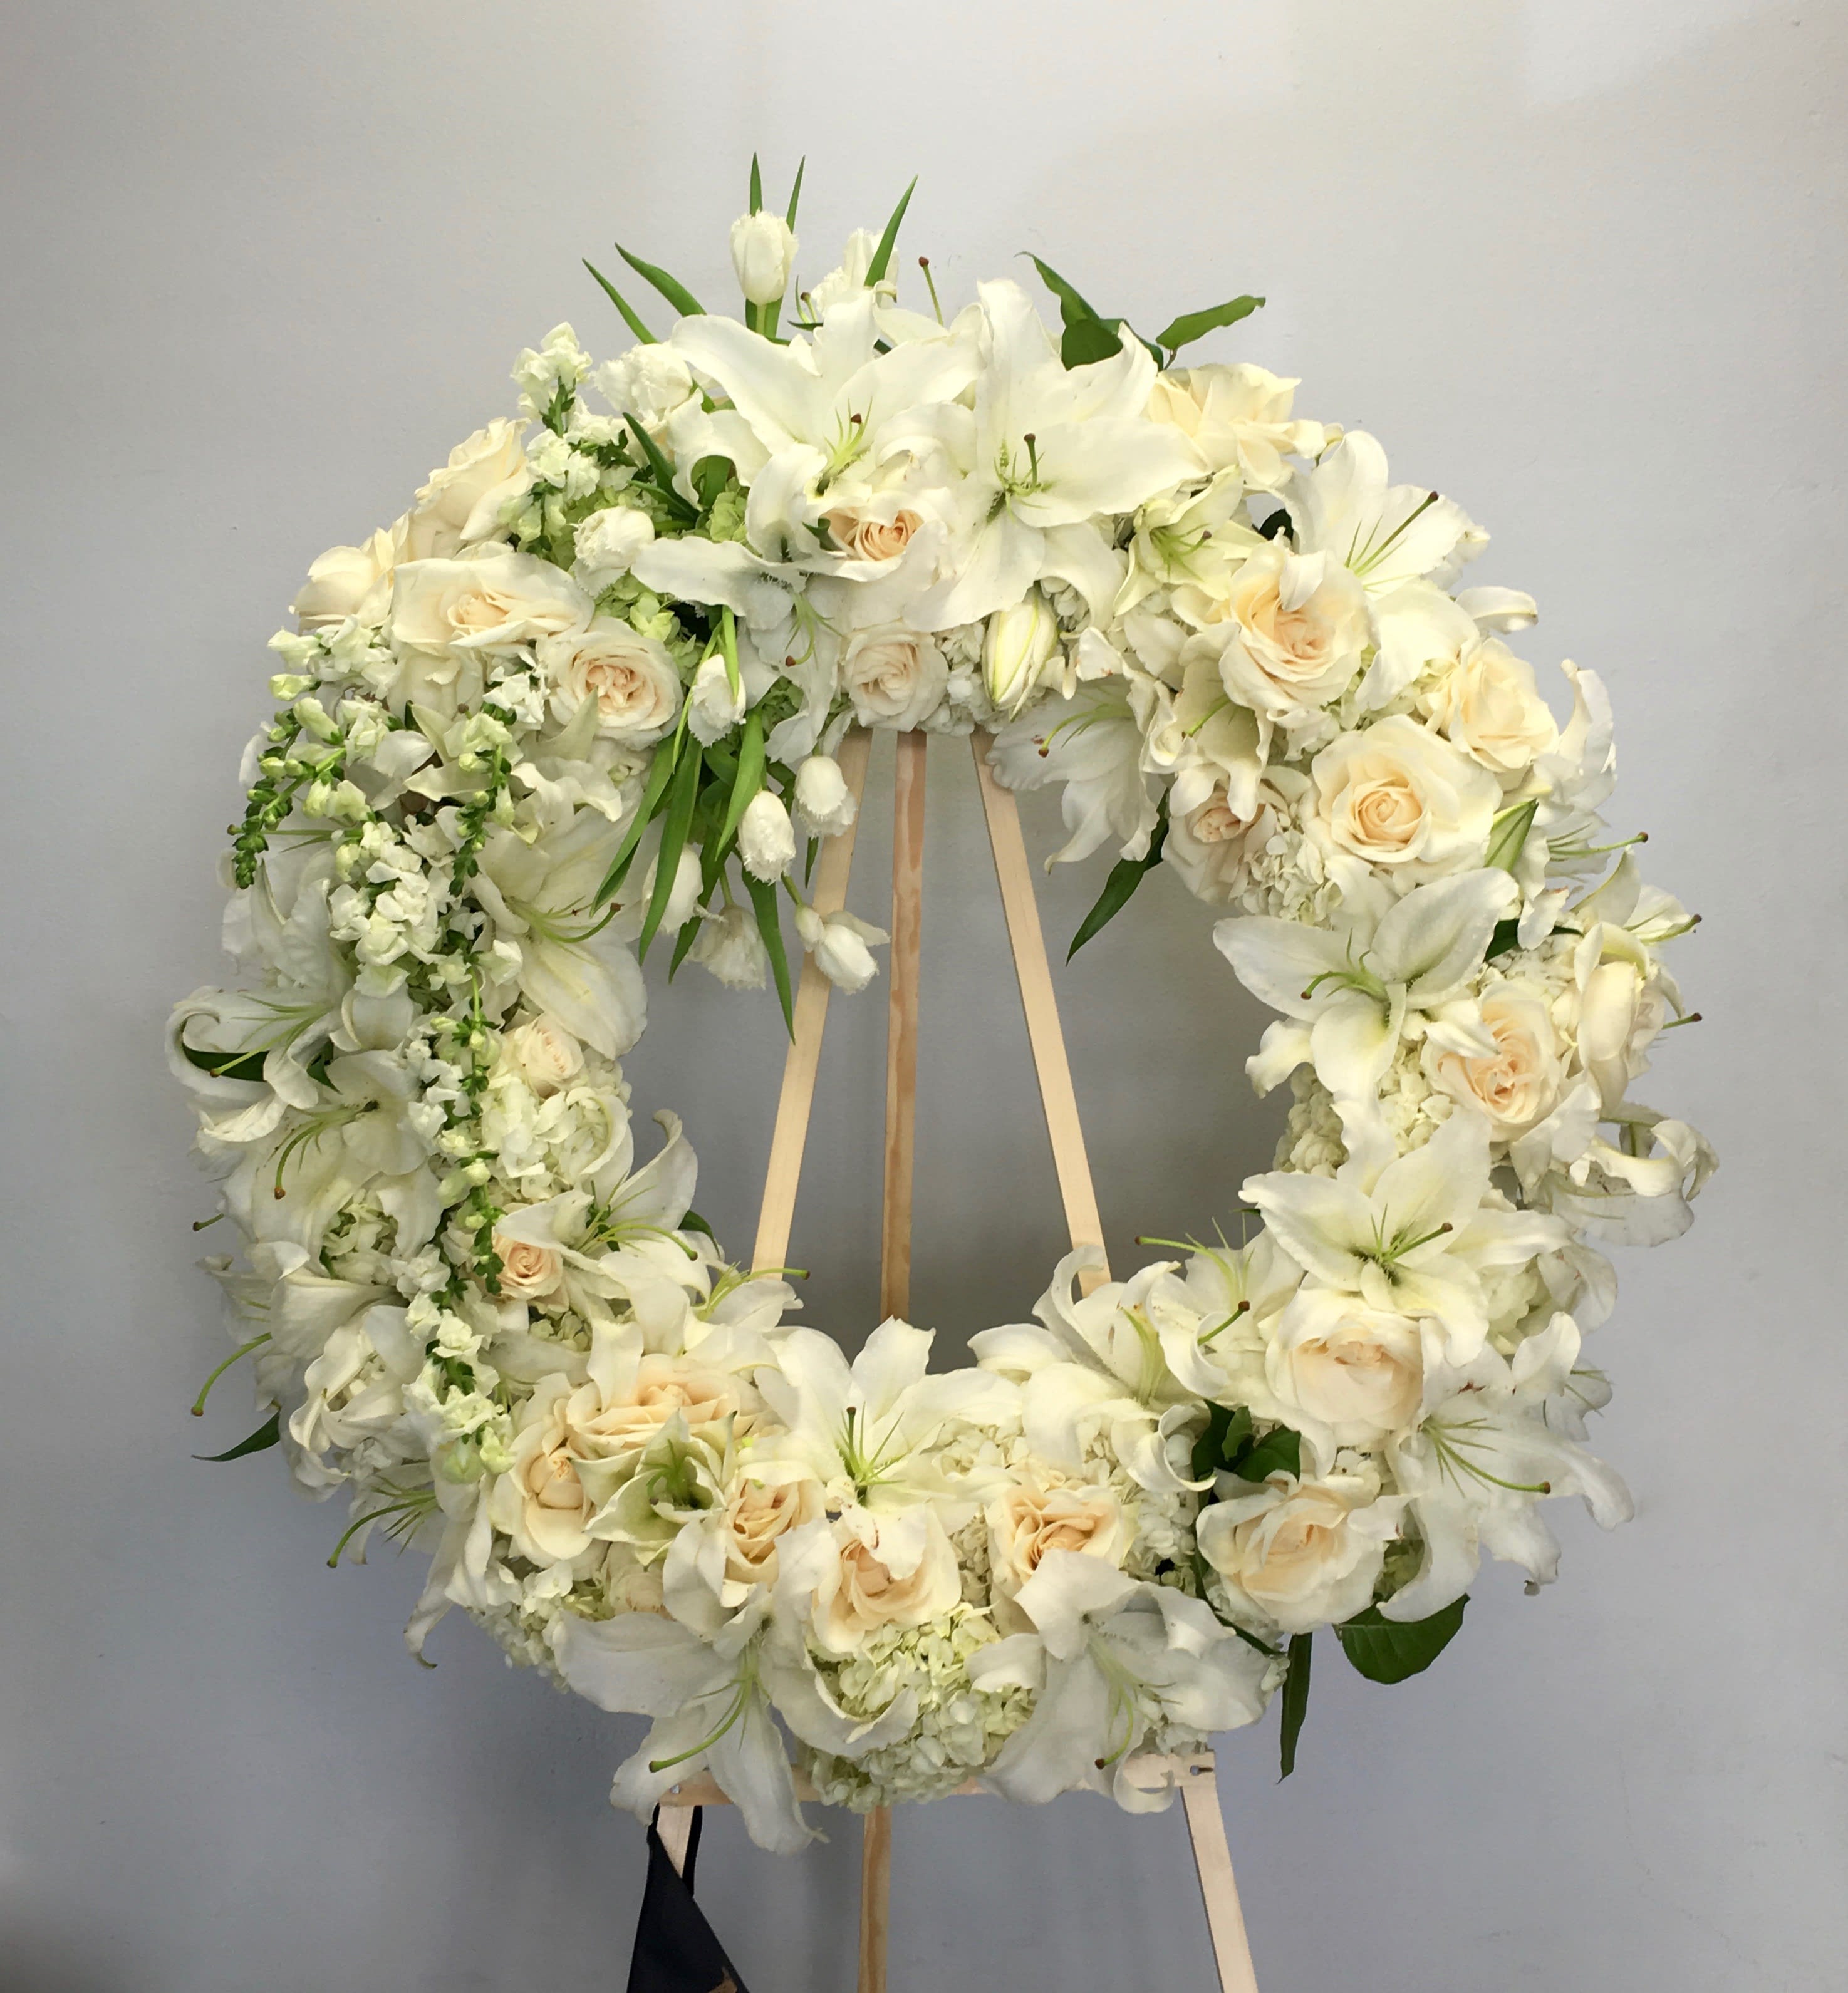 Starry Eyed Wreath  - This wreath includes bright white stargazer lilies, roses, and seasonal greens.  First photo shows standard size, second photo shows deluxe size.  We include easel, printed banner and delivery (some fees may apply).  Standard size is 30'', deluxe is 36'', and premium is 42''.